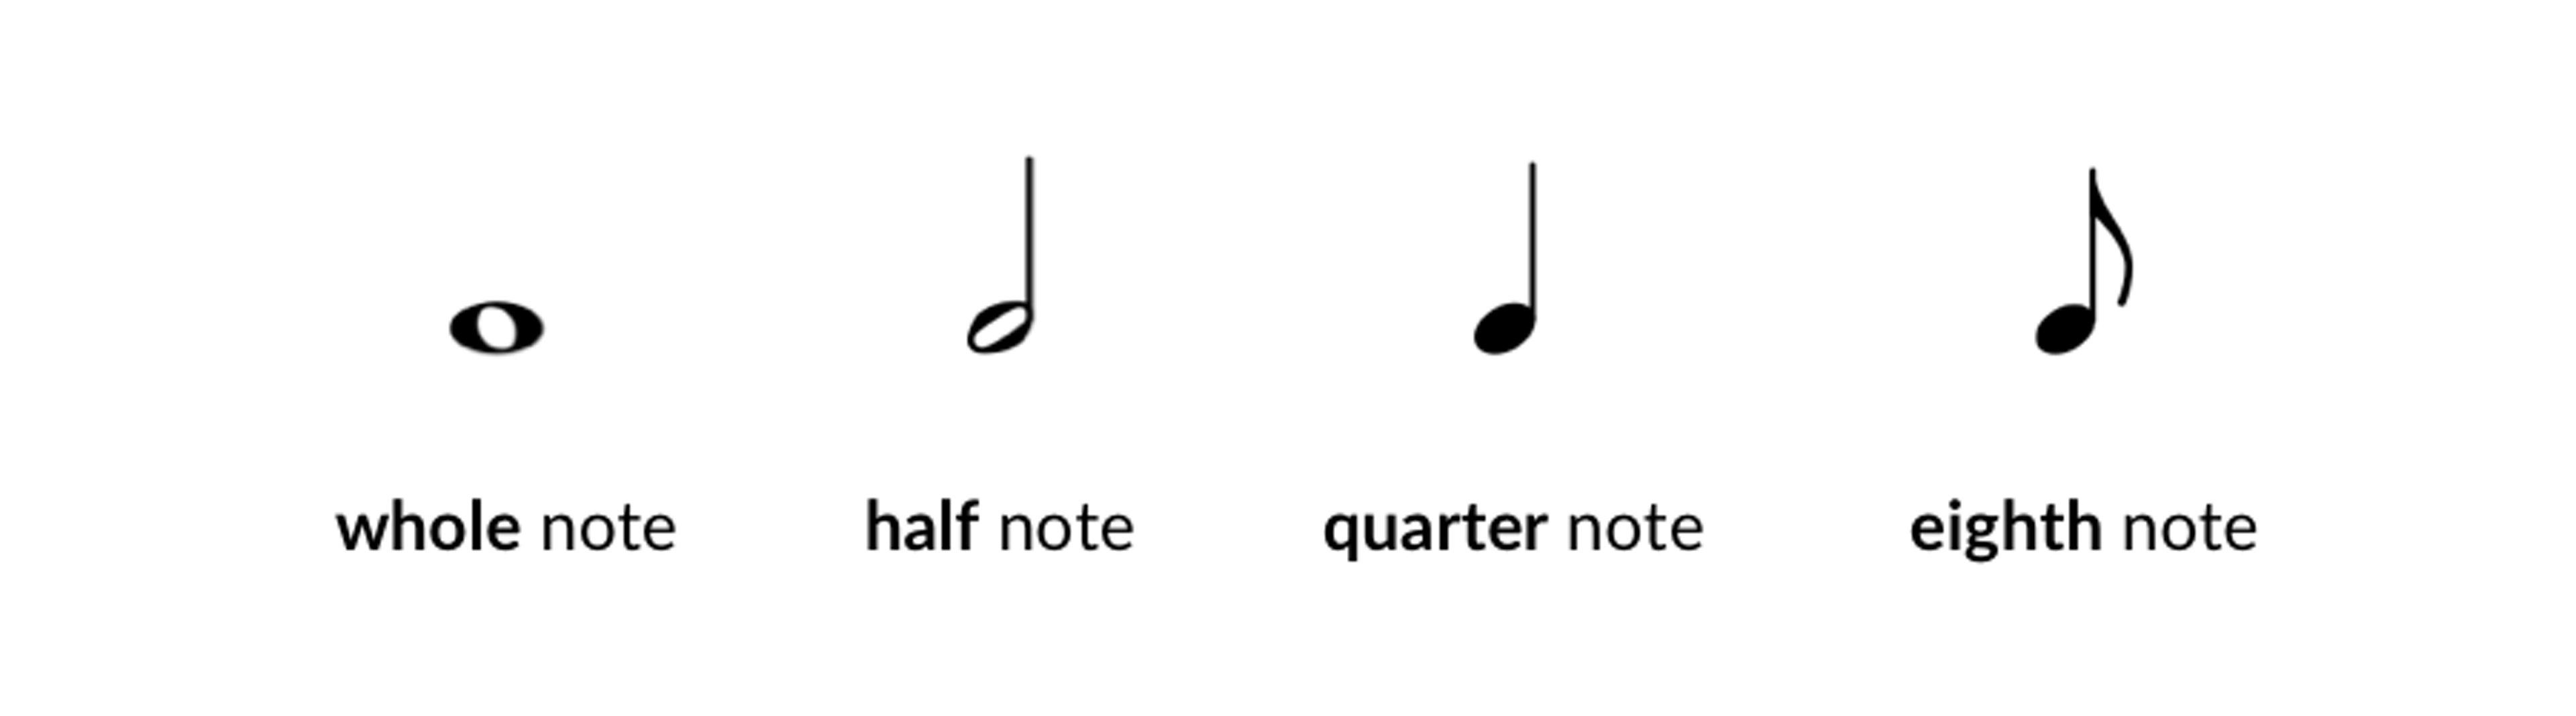 whole note, halt note, quarter note and eigth note